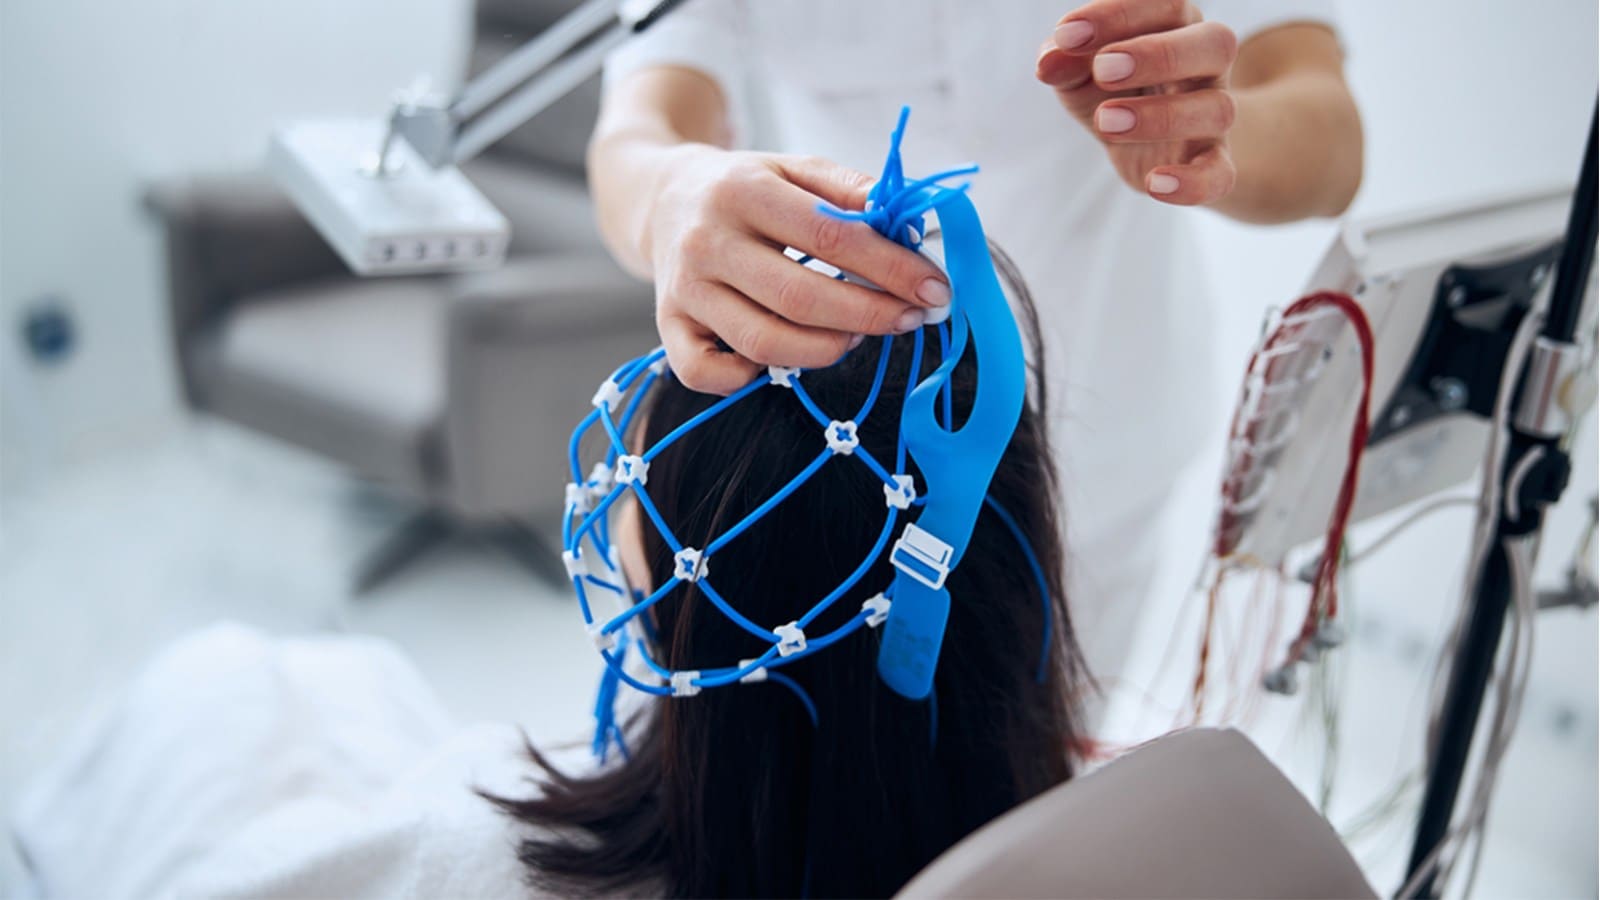 Female medical specialist removing silicone cap after performing an EEG